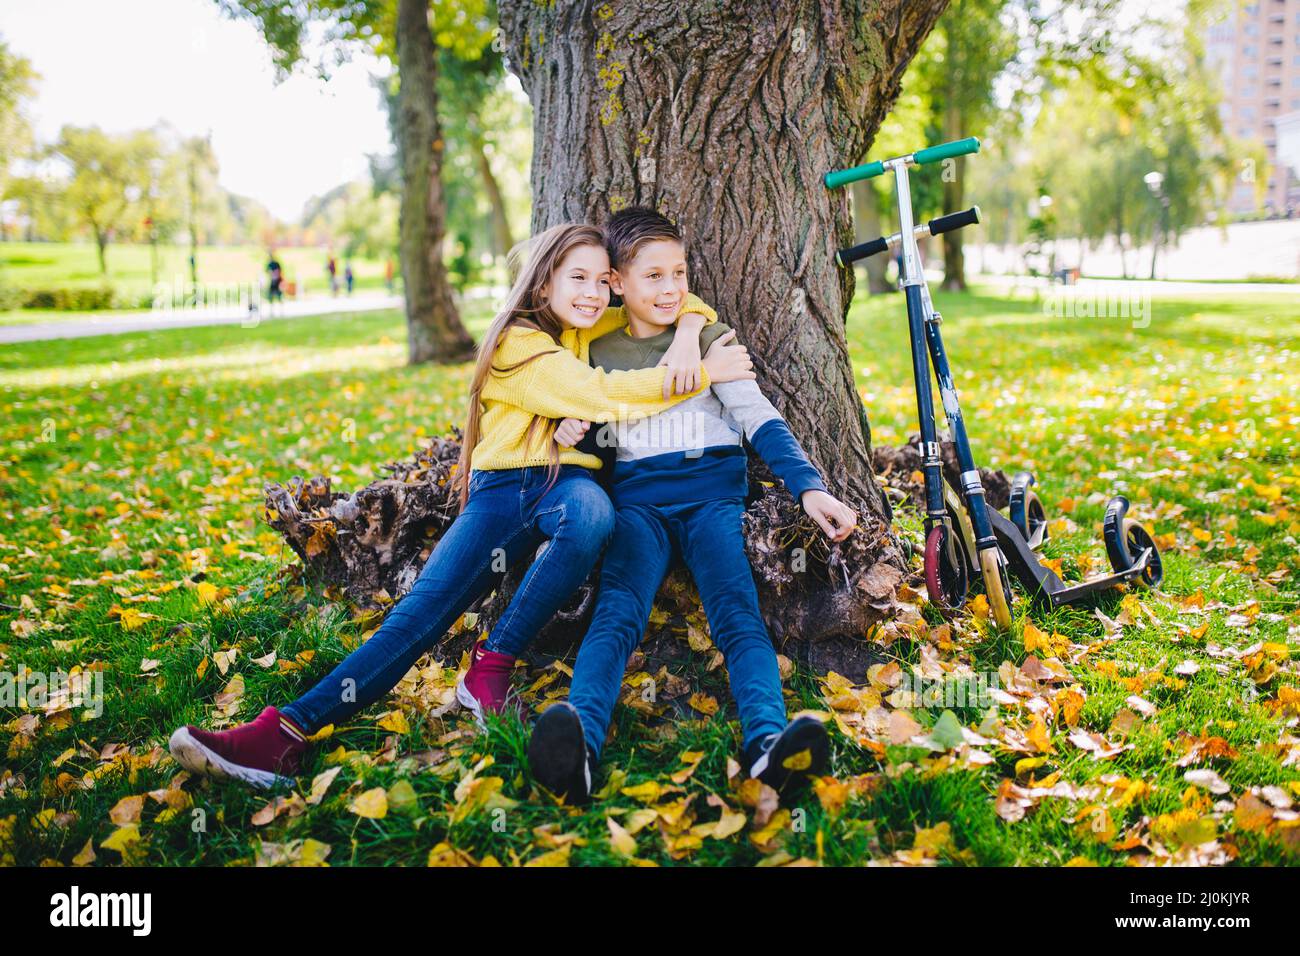 Active leisure and outdoor sports for children. Happy childhood. Boy and girl twins happily posing hugging while sitting under a Stock Photo